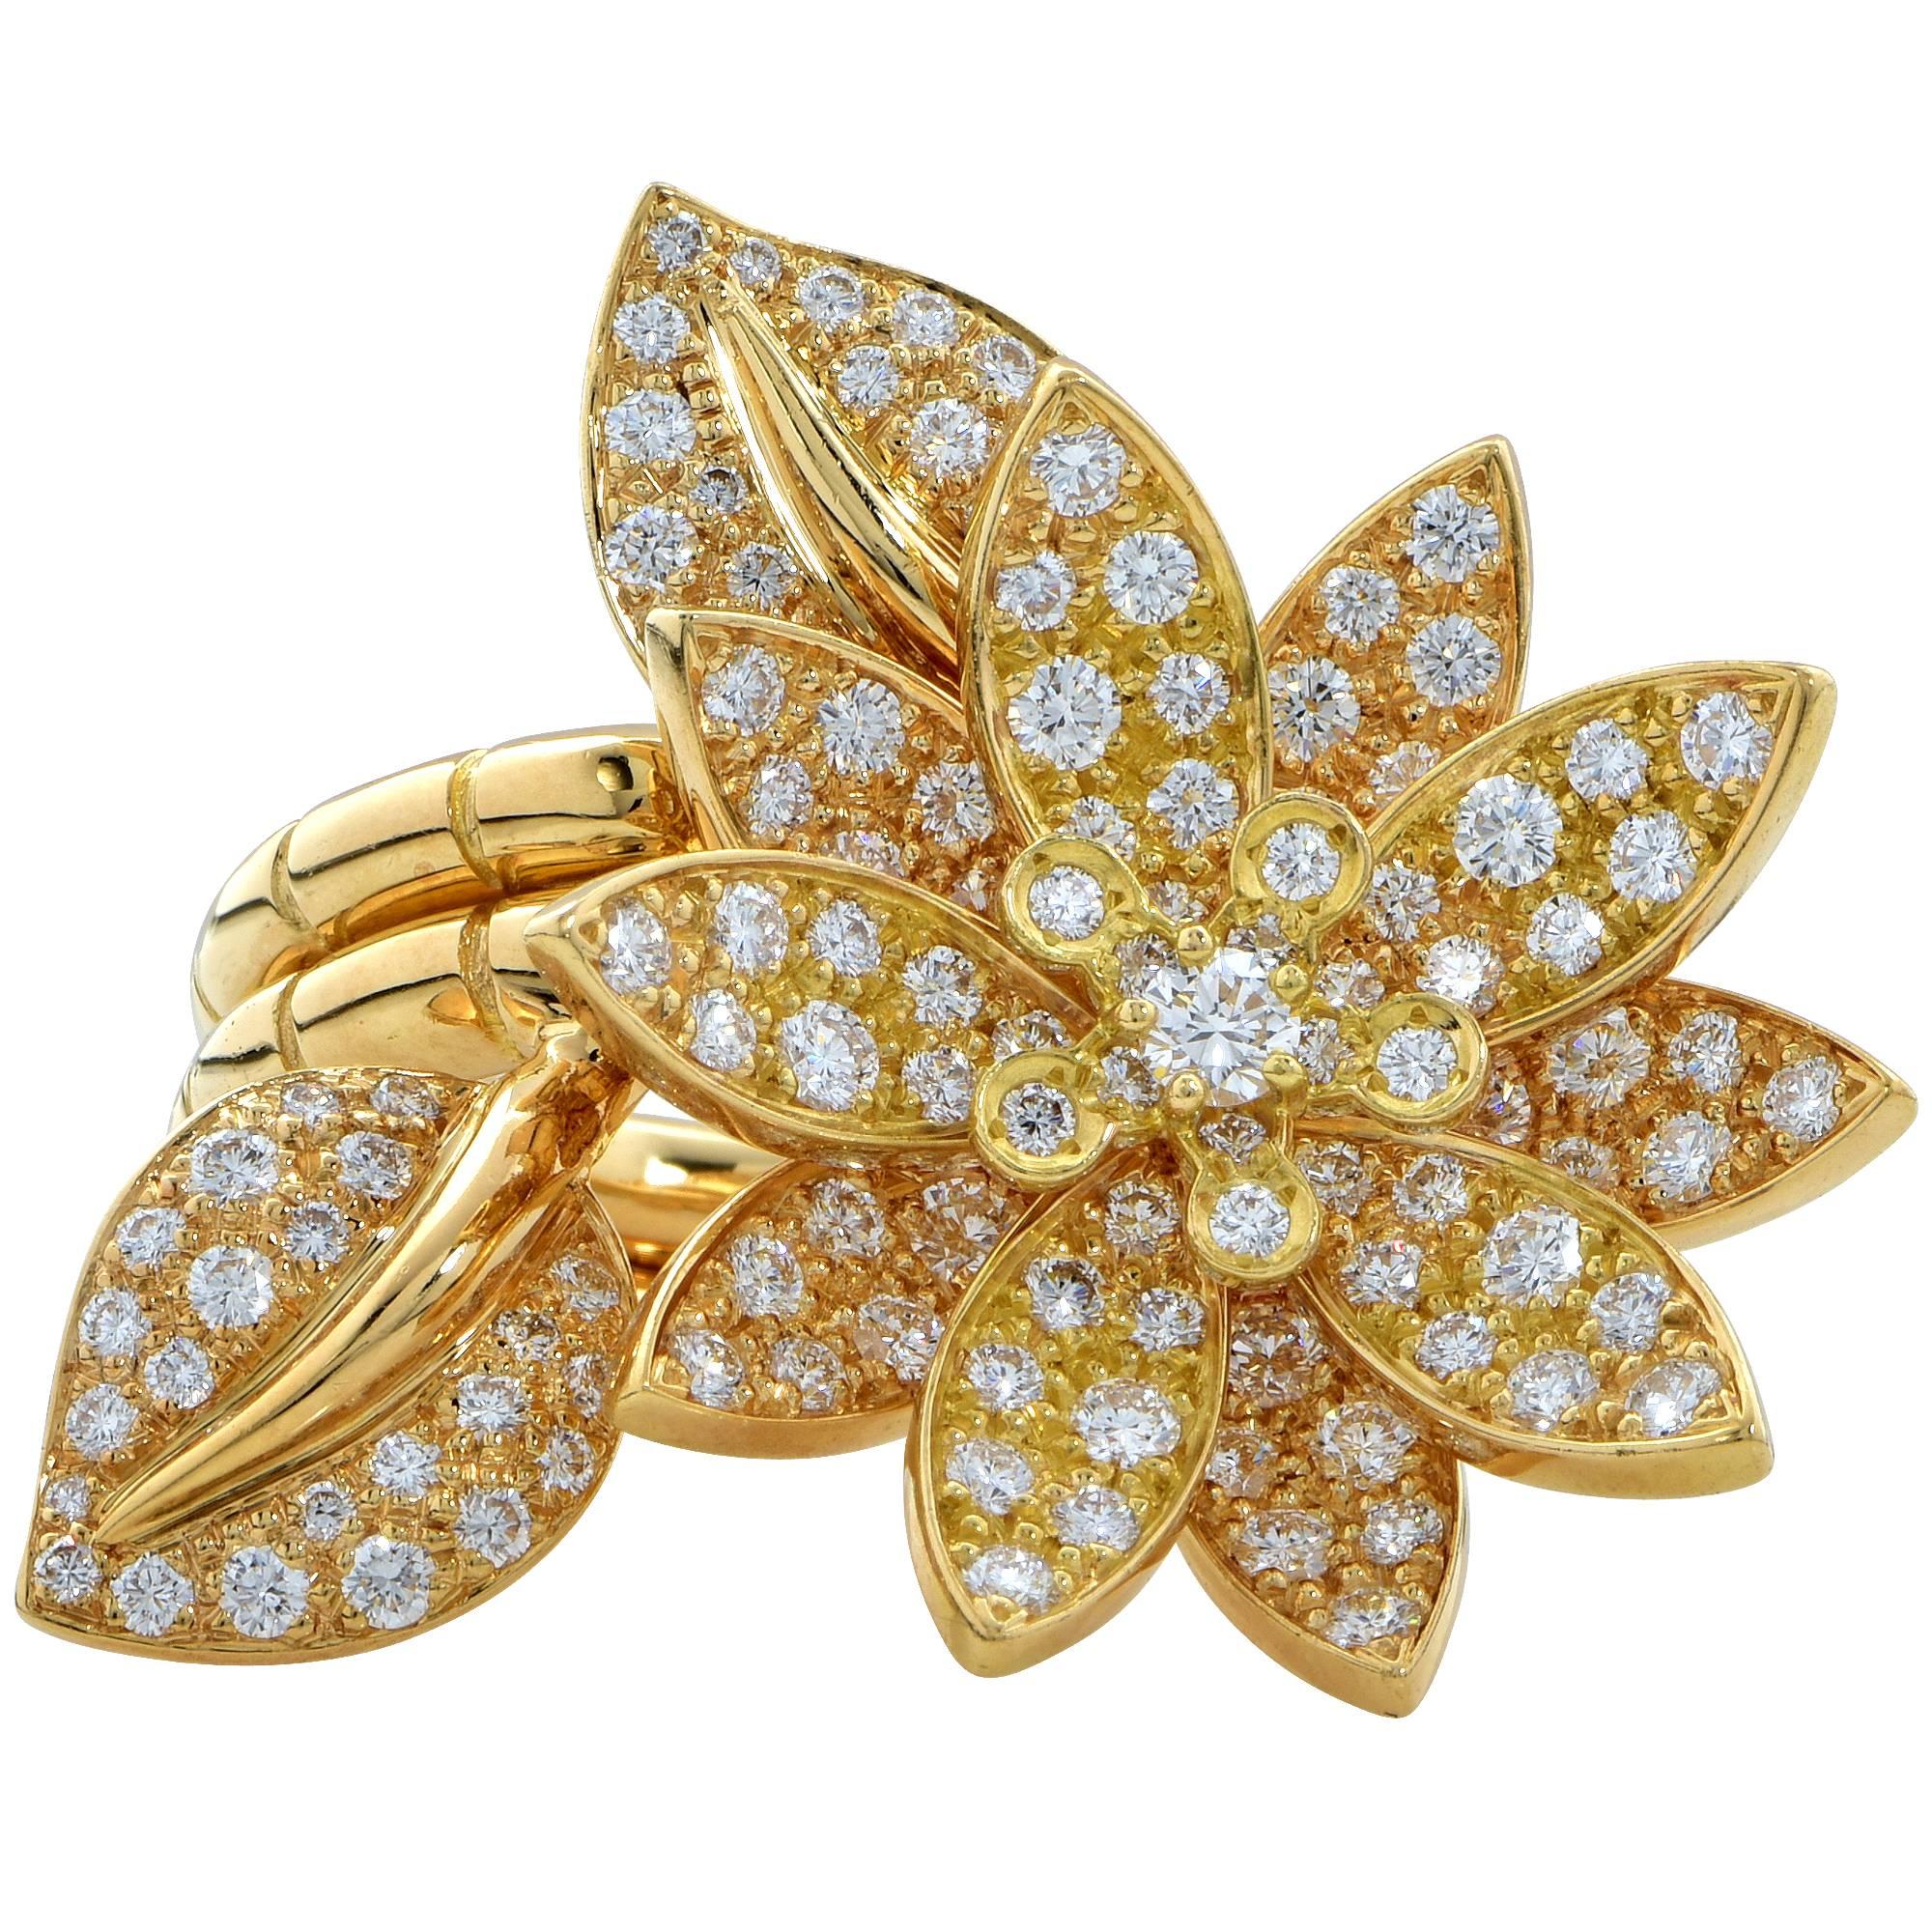 Van Cleef & Arpels Lotus between the fingers ring hand crafted 18k yellow gold containing 127 round brilliant cut diamonds weighing 2.13cts D- F color and IF-VVS2 clarity. European size 52, US size 6. The current retail is $43,500 USD.  A truly